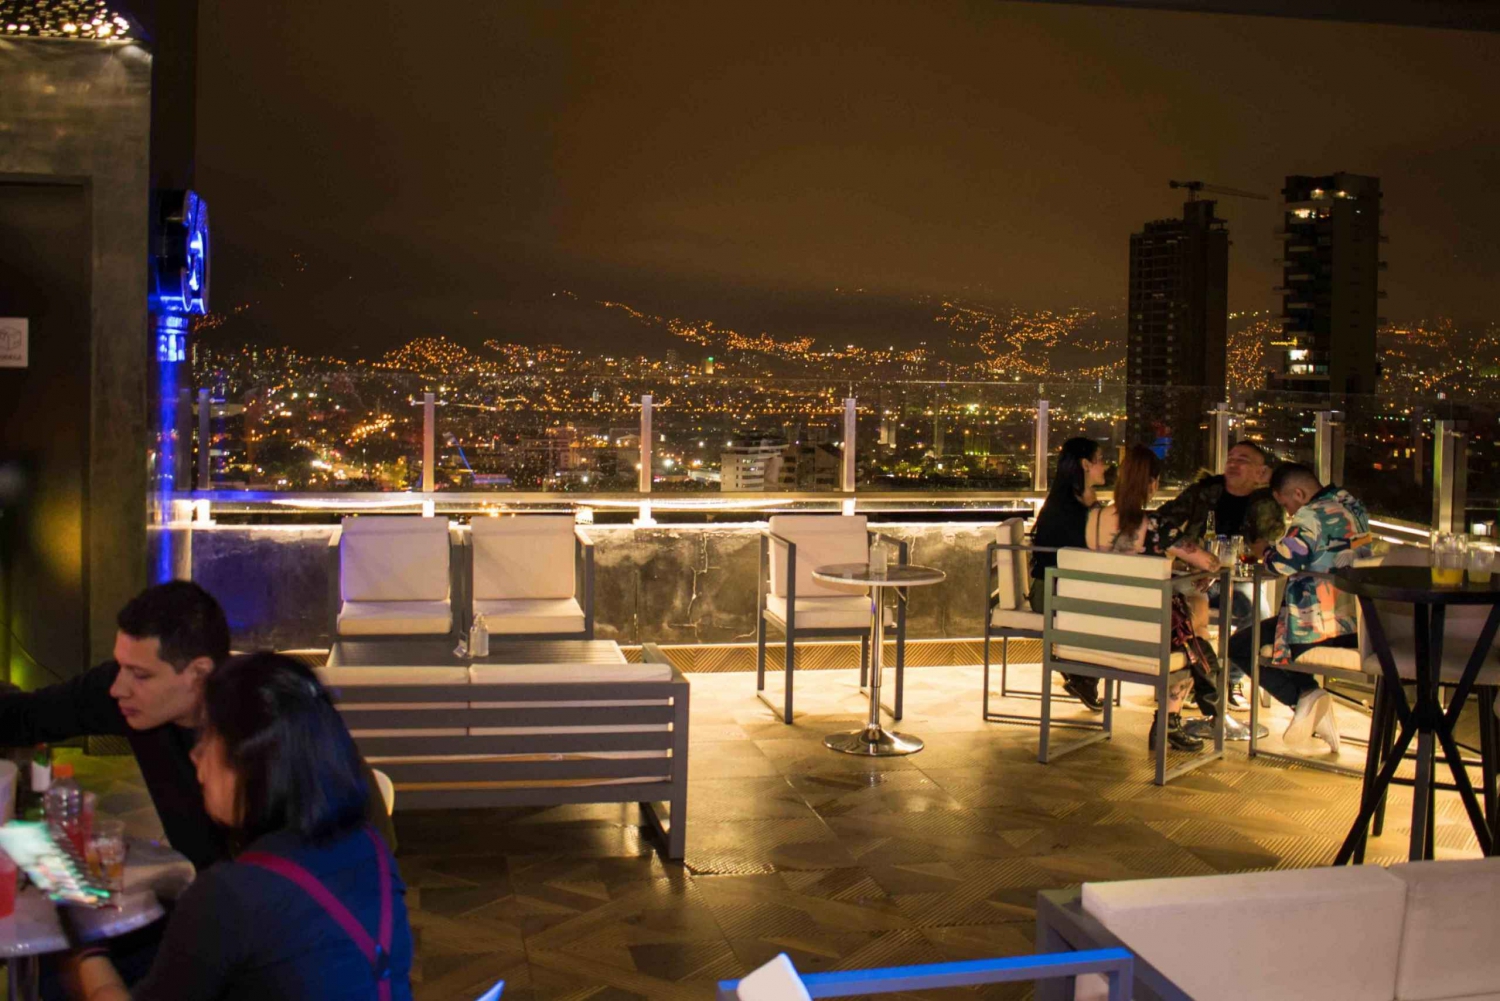 Medellín: Sunday Afternoon Pool Party With Views of the City